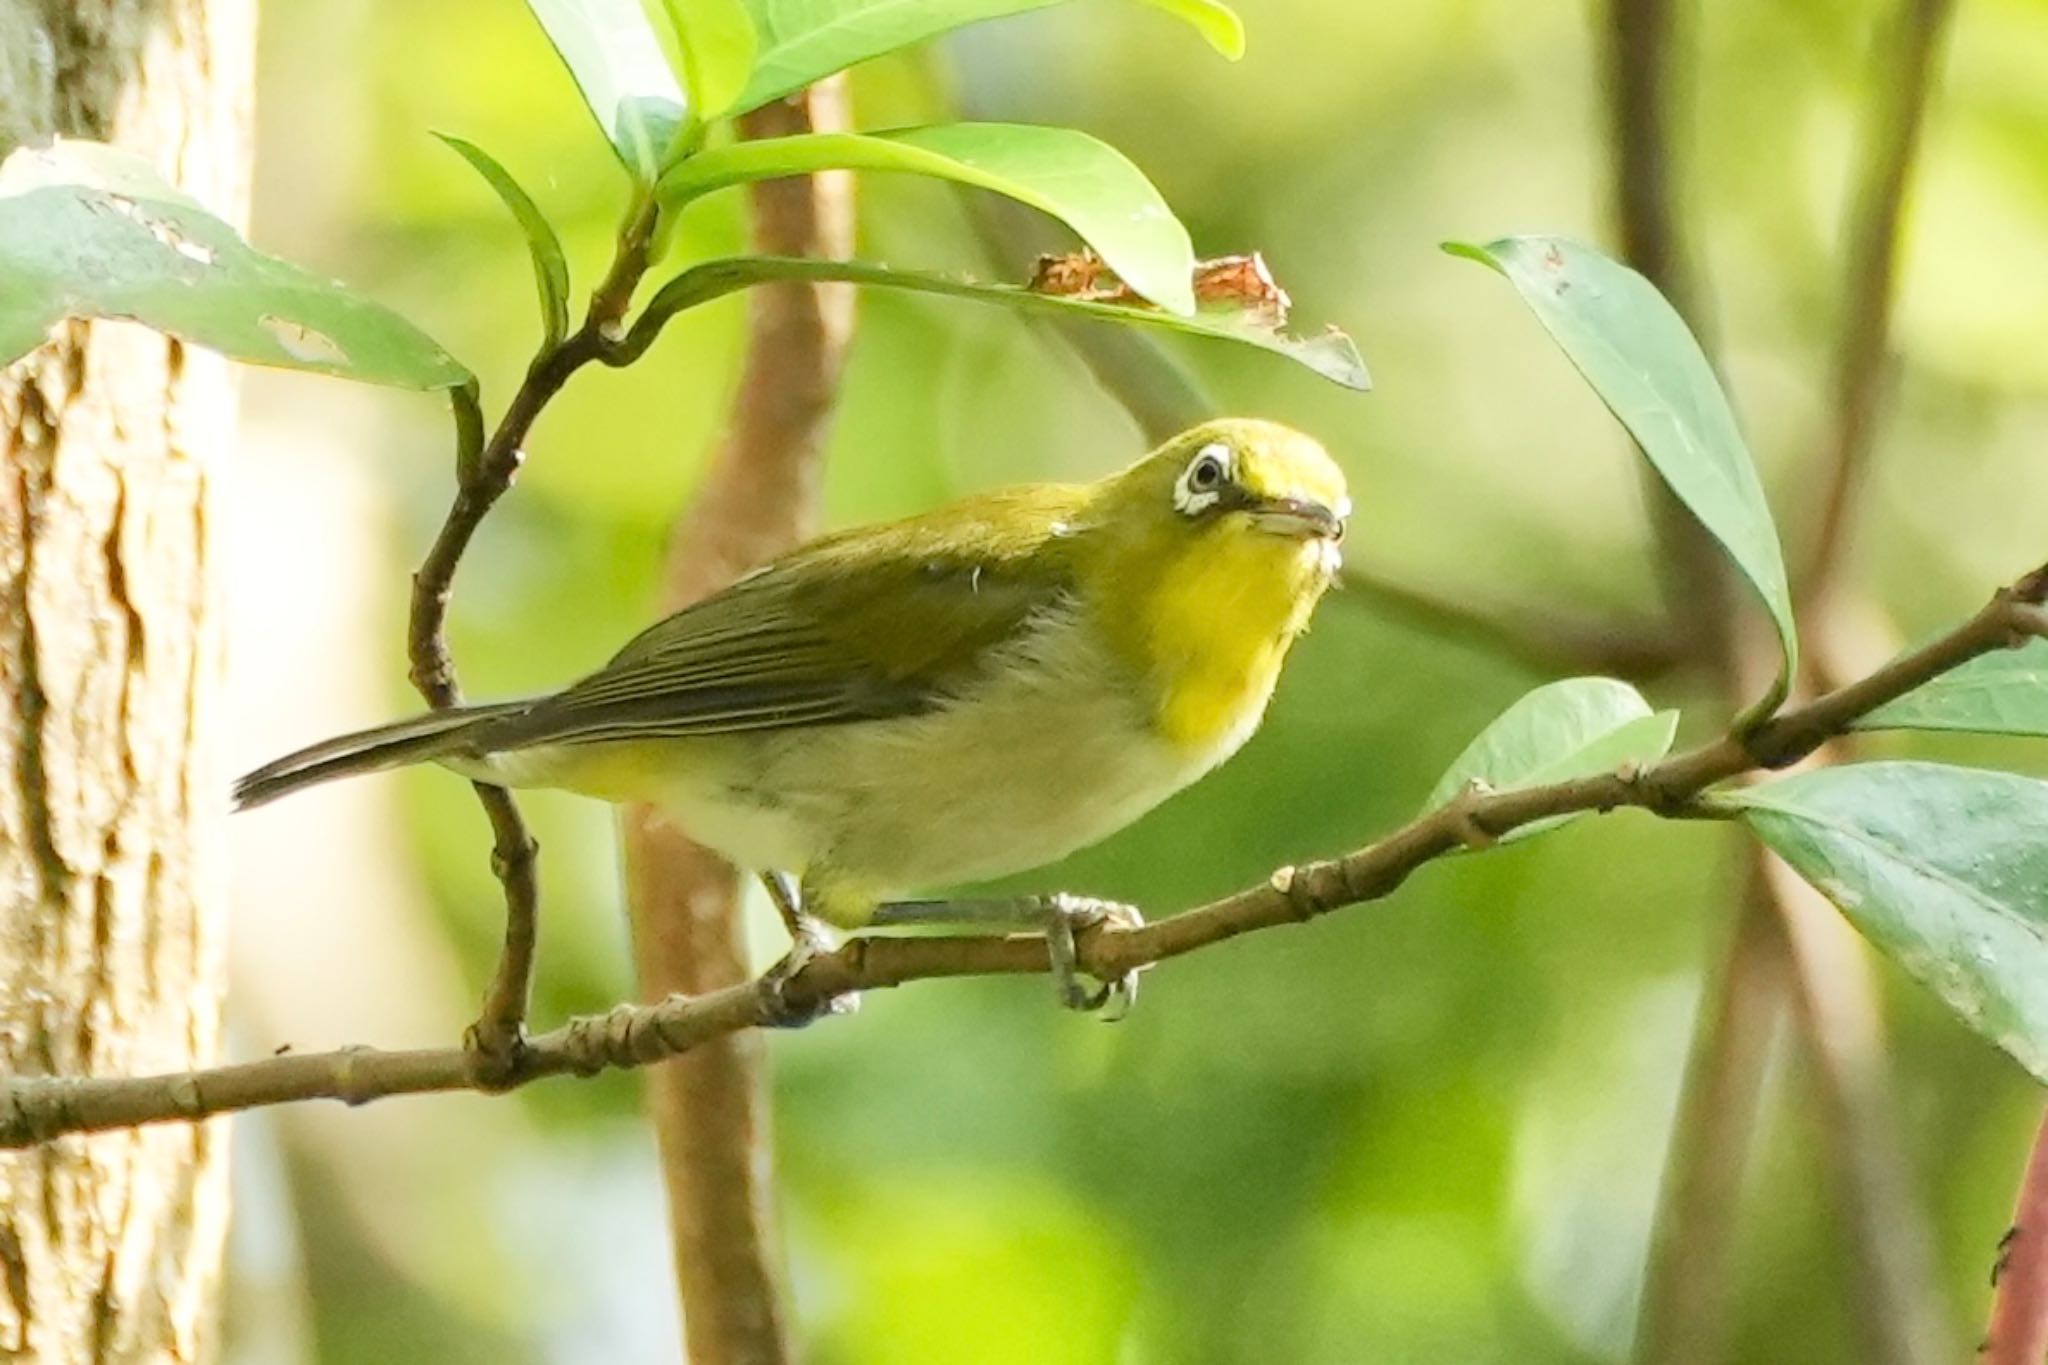 Photo of Japanese White-eye(loochooensis) at Amami Nature Observation Forest by あらどん